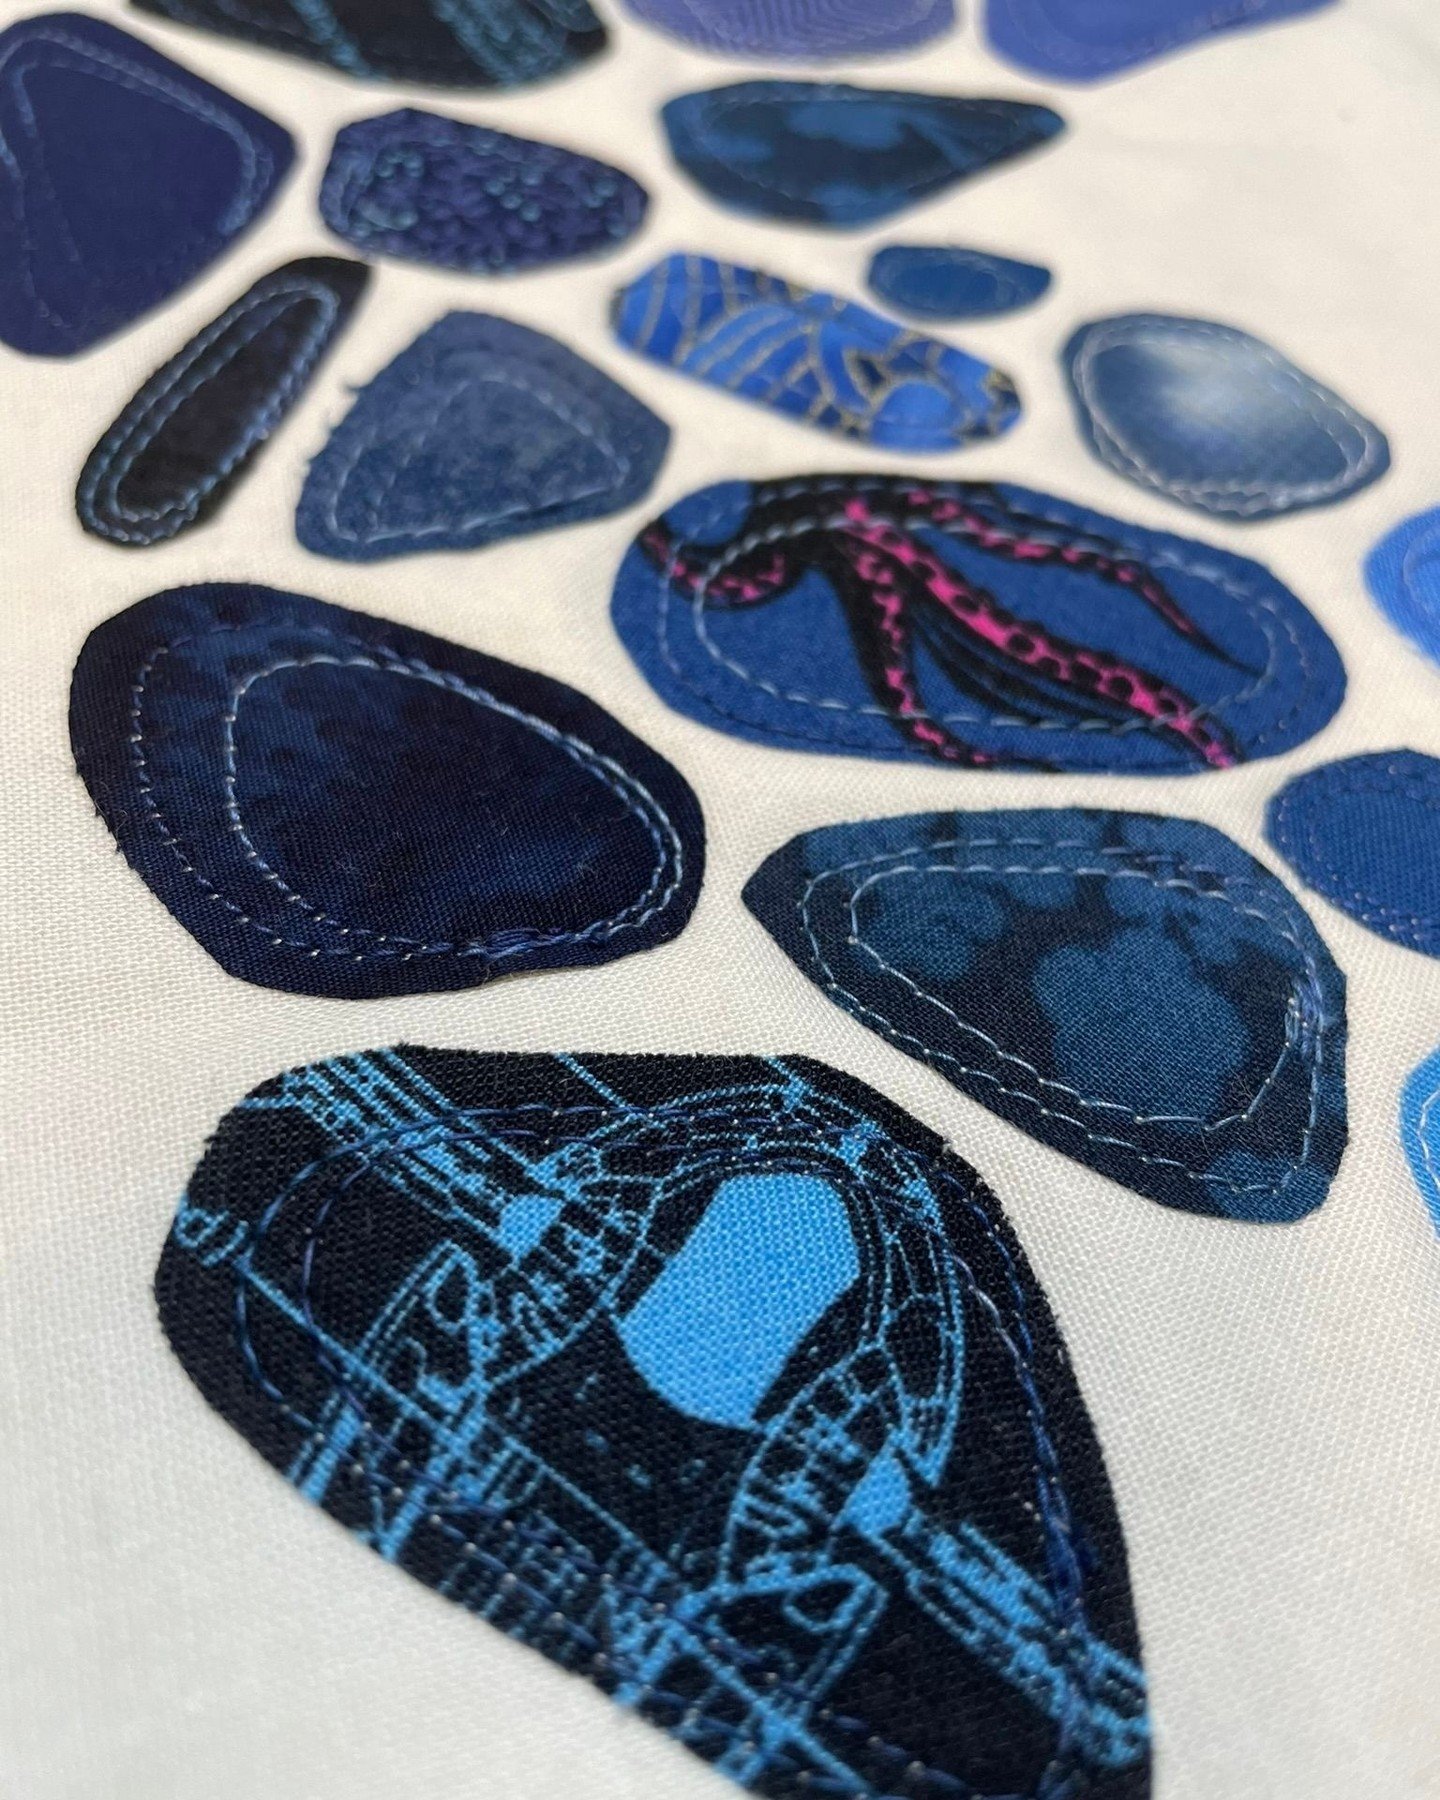 Just in time for Mother's Day (I can ship Priority) - a handful of mini seaglass quilts, ready to hang and bring some color to any space!⁣
From a distance, these minis tell a color story: shade, hue, value. Up close, treasures emerge...tentacles...fl